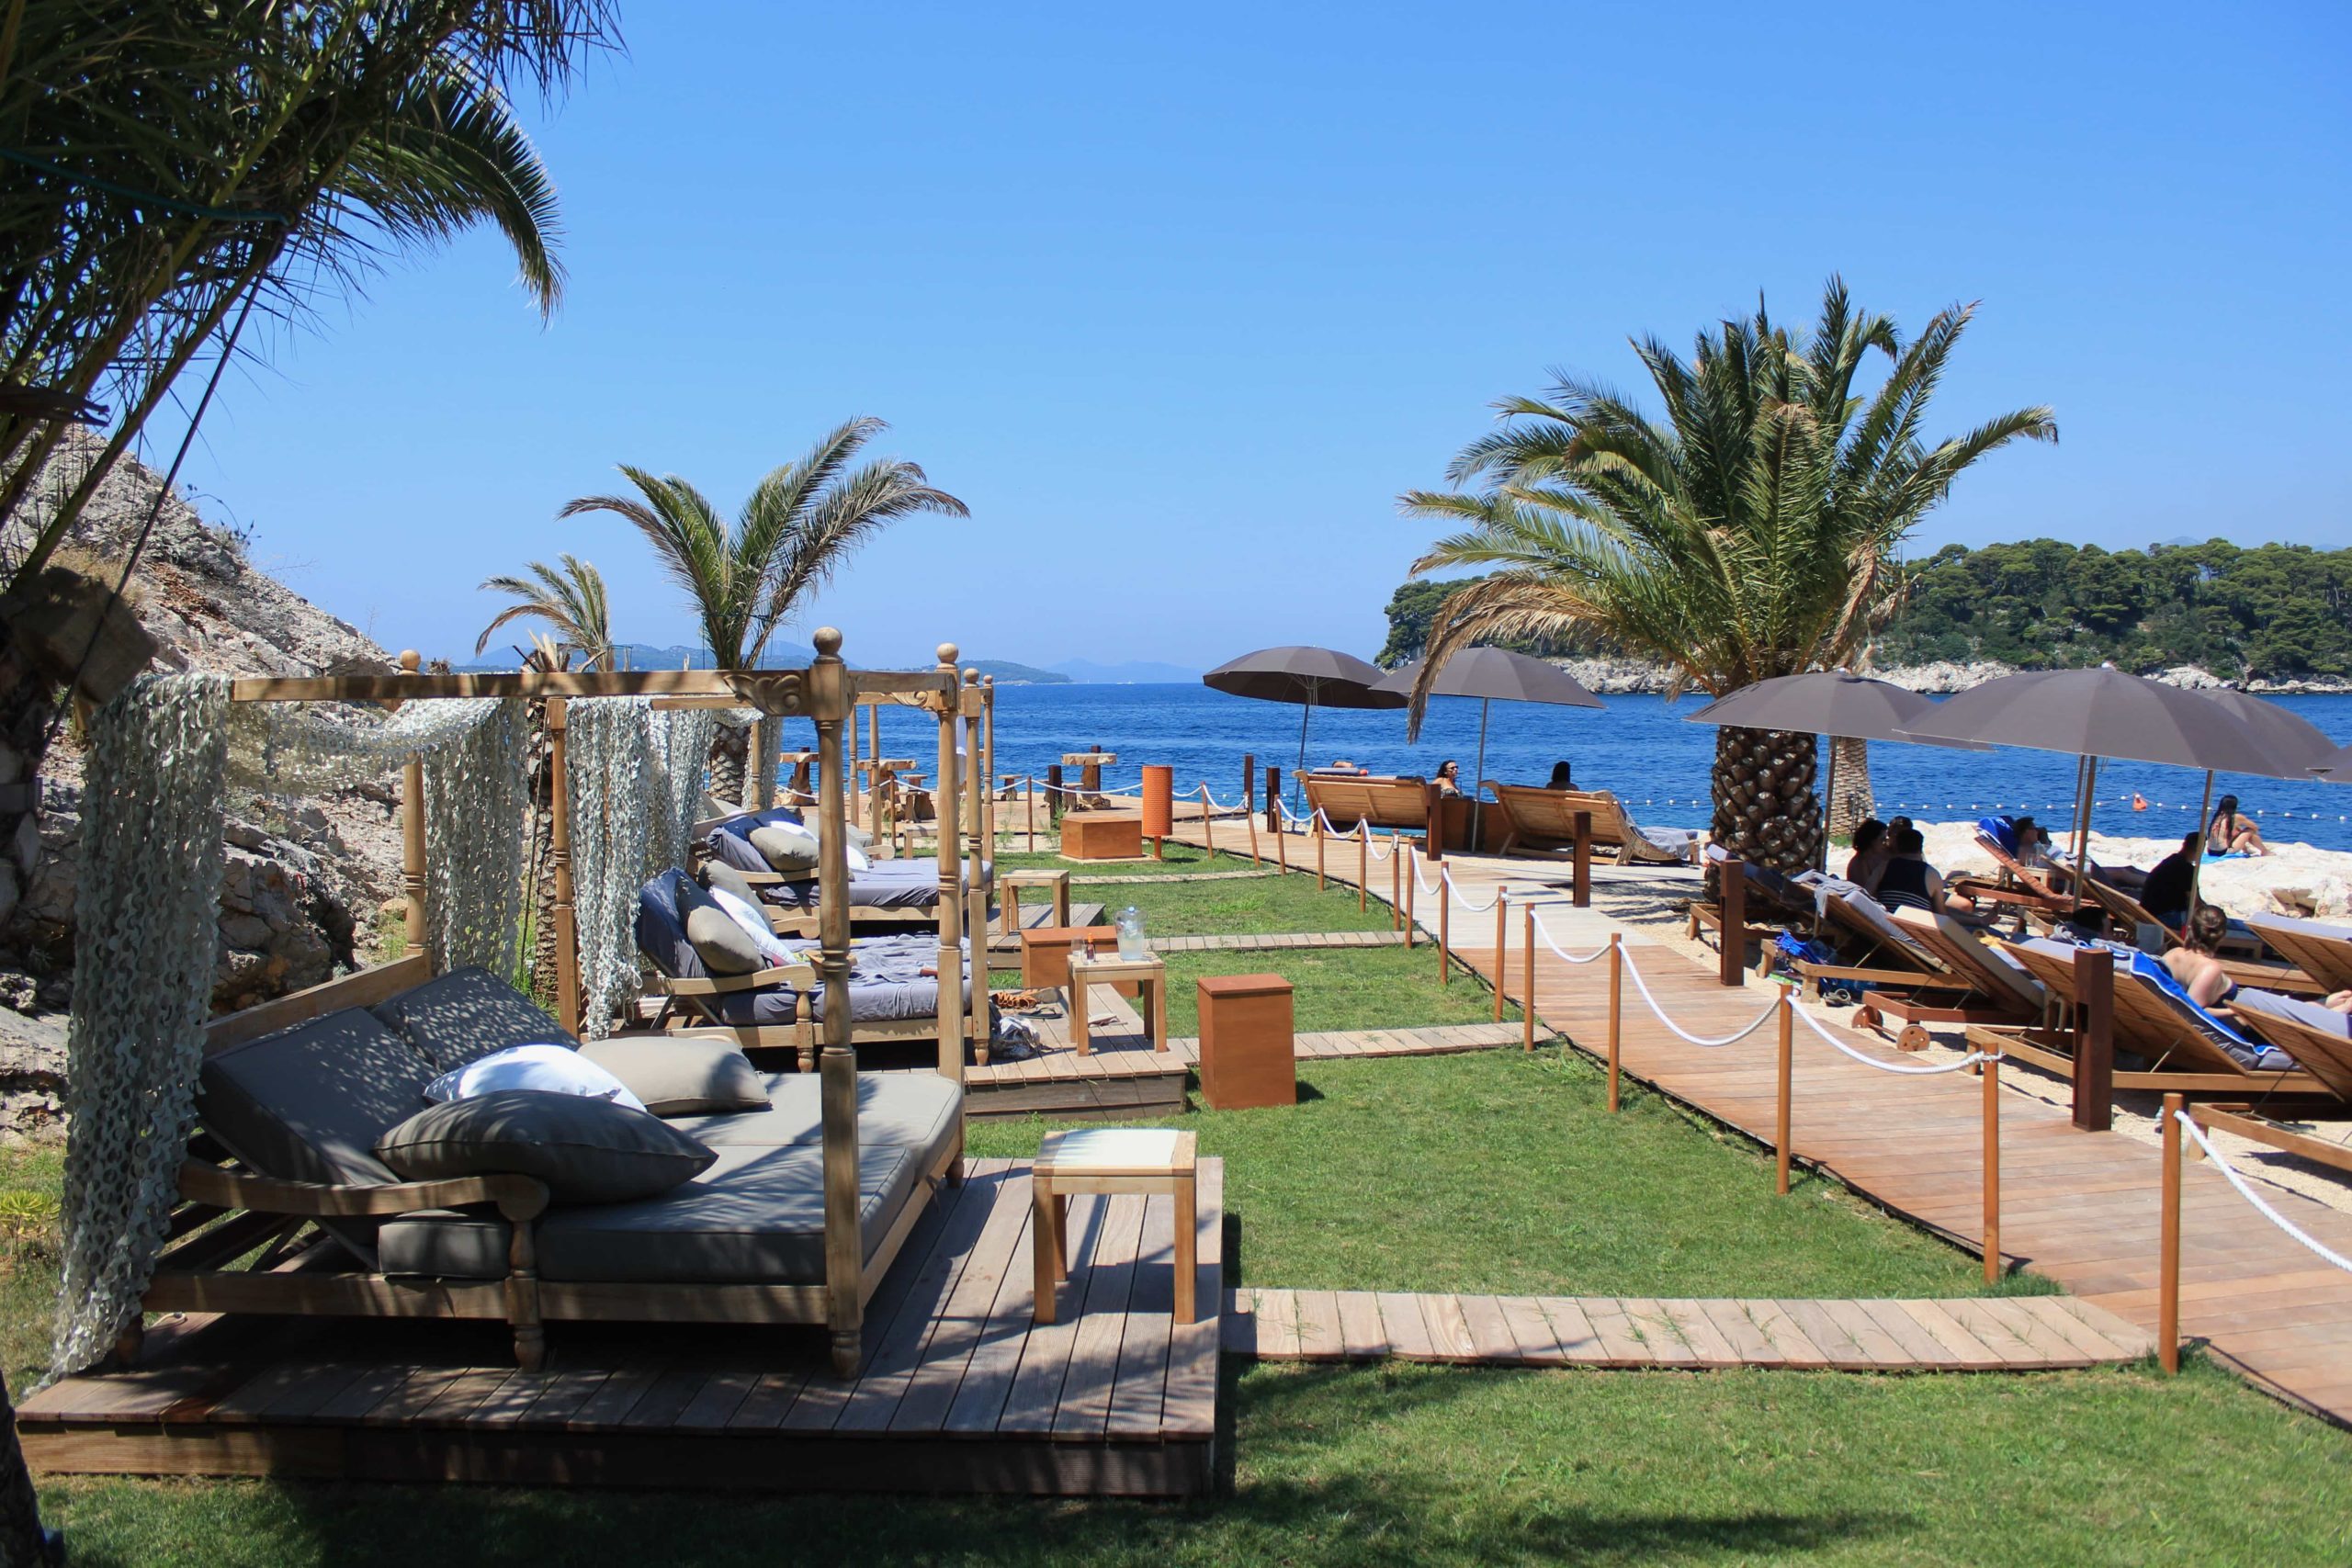 Sun loungers and cabanas at Coral Beach Club in Dubrovnik